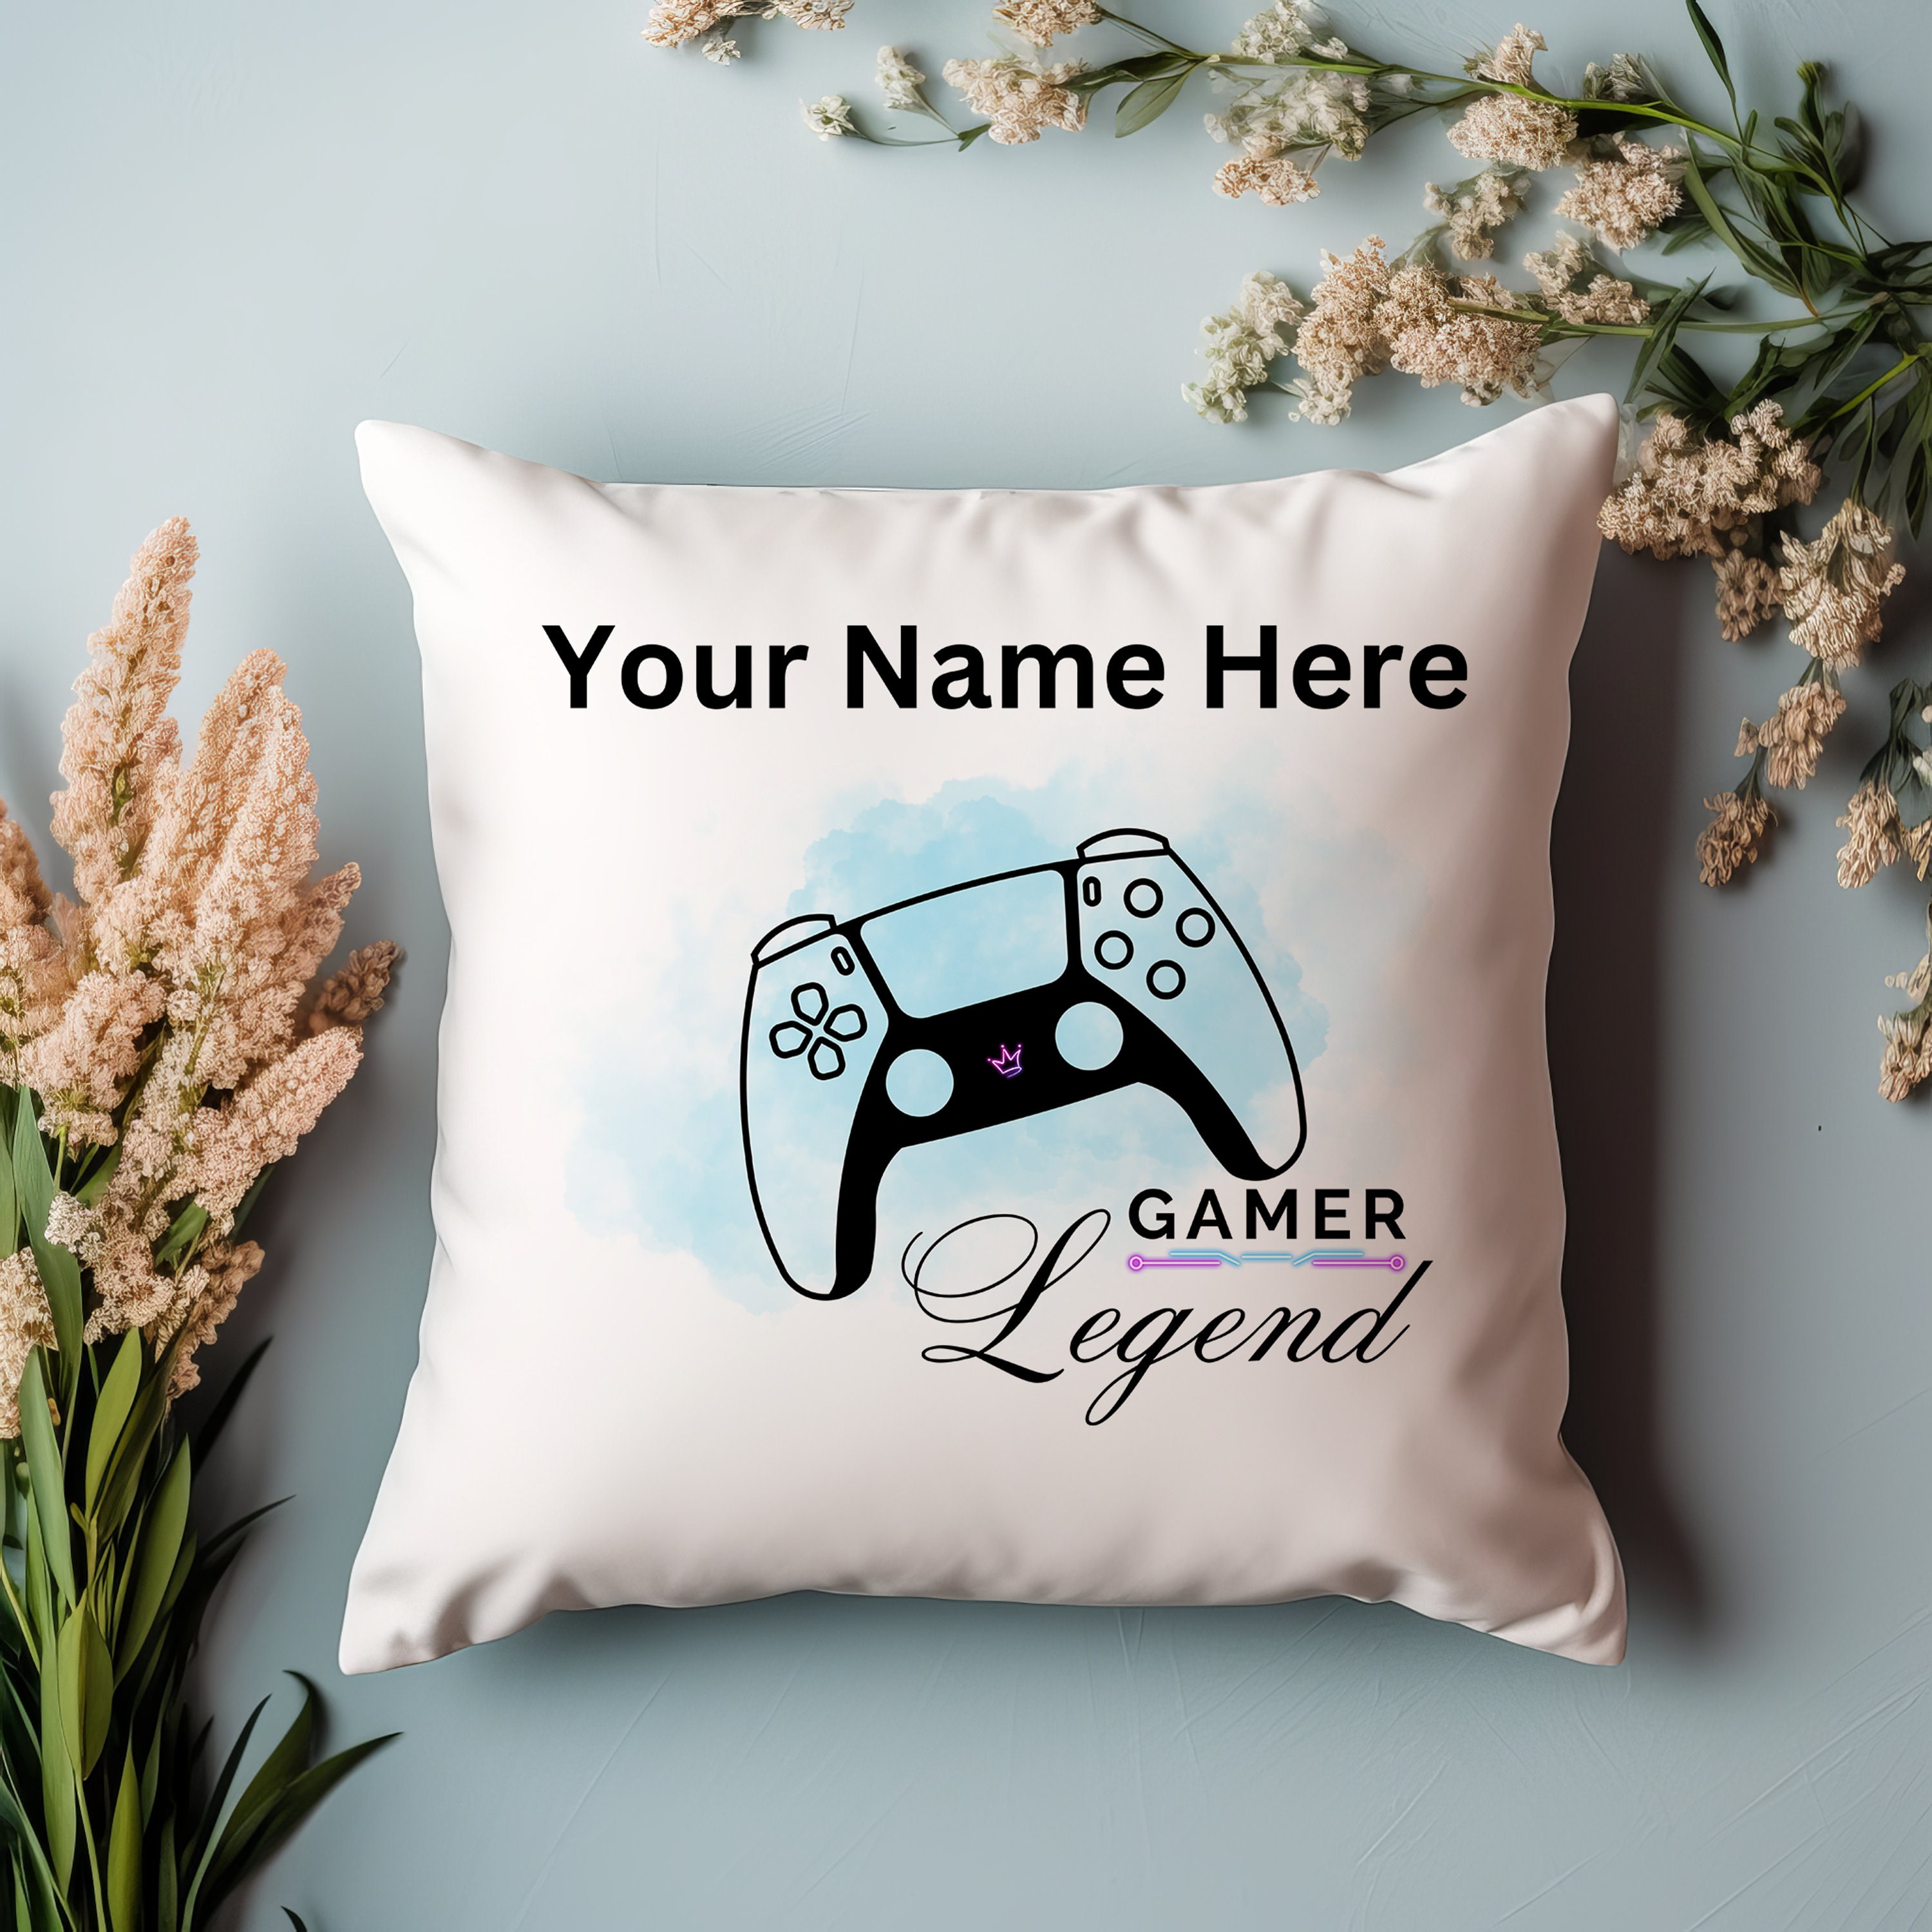 45X45CM Hot Game Theme Throw Pillow Case Novelty Gaming Controller  Decorative Cushion Cover Cool Game Gamer Gifts Home Decor - AliExpress